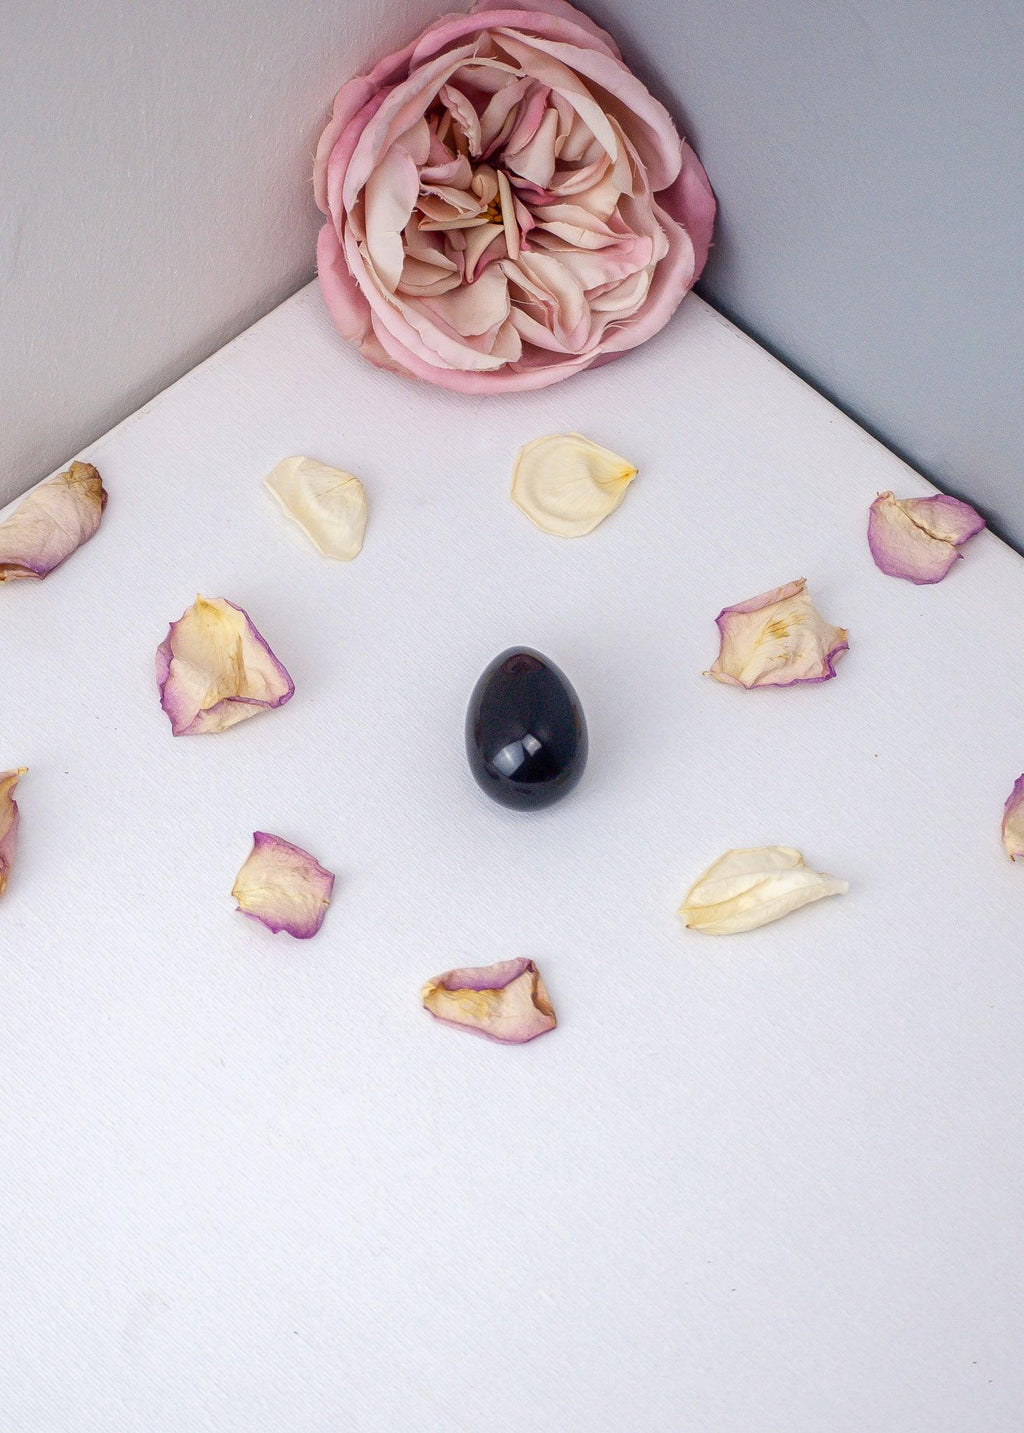 Obsidian Yoni Egg, Crystal Gemstone Healing, Kegel Muscle and Pelvic Floor Training, Single Drilled or Undrilled Yoni Egg